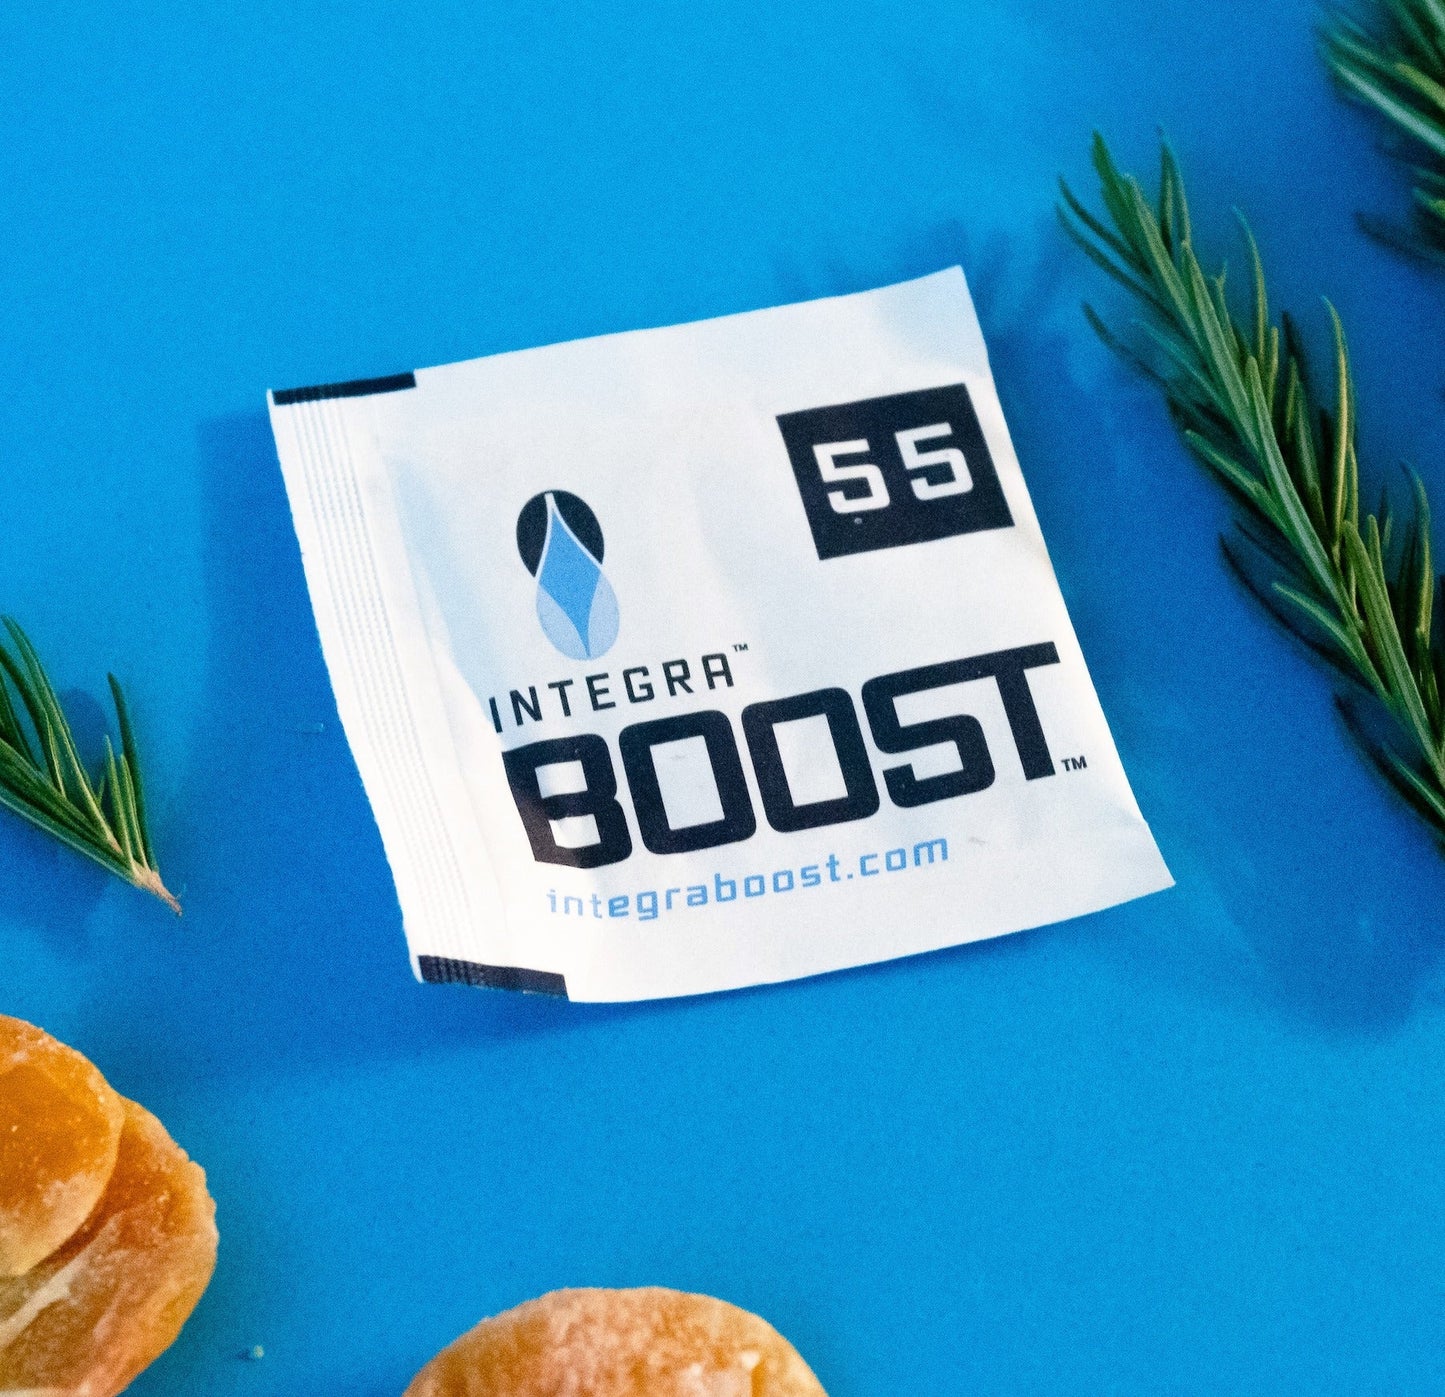 Integra Boost® 4 Gram 55% rH Humidity Control Packets are salt-free, spill-proof and FDA-complaint so you can safely and confidently place Integra BOOST® packs directly inside a container or jar to absorb and/or provide excess moisture as needed